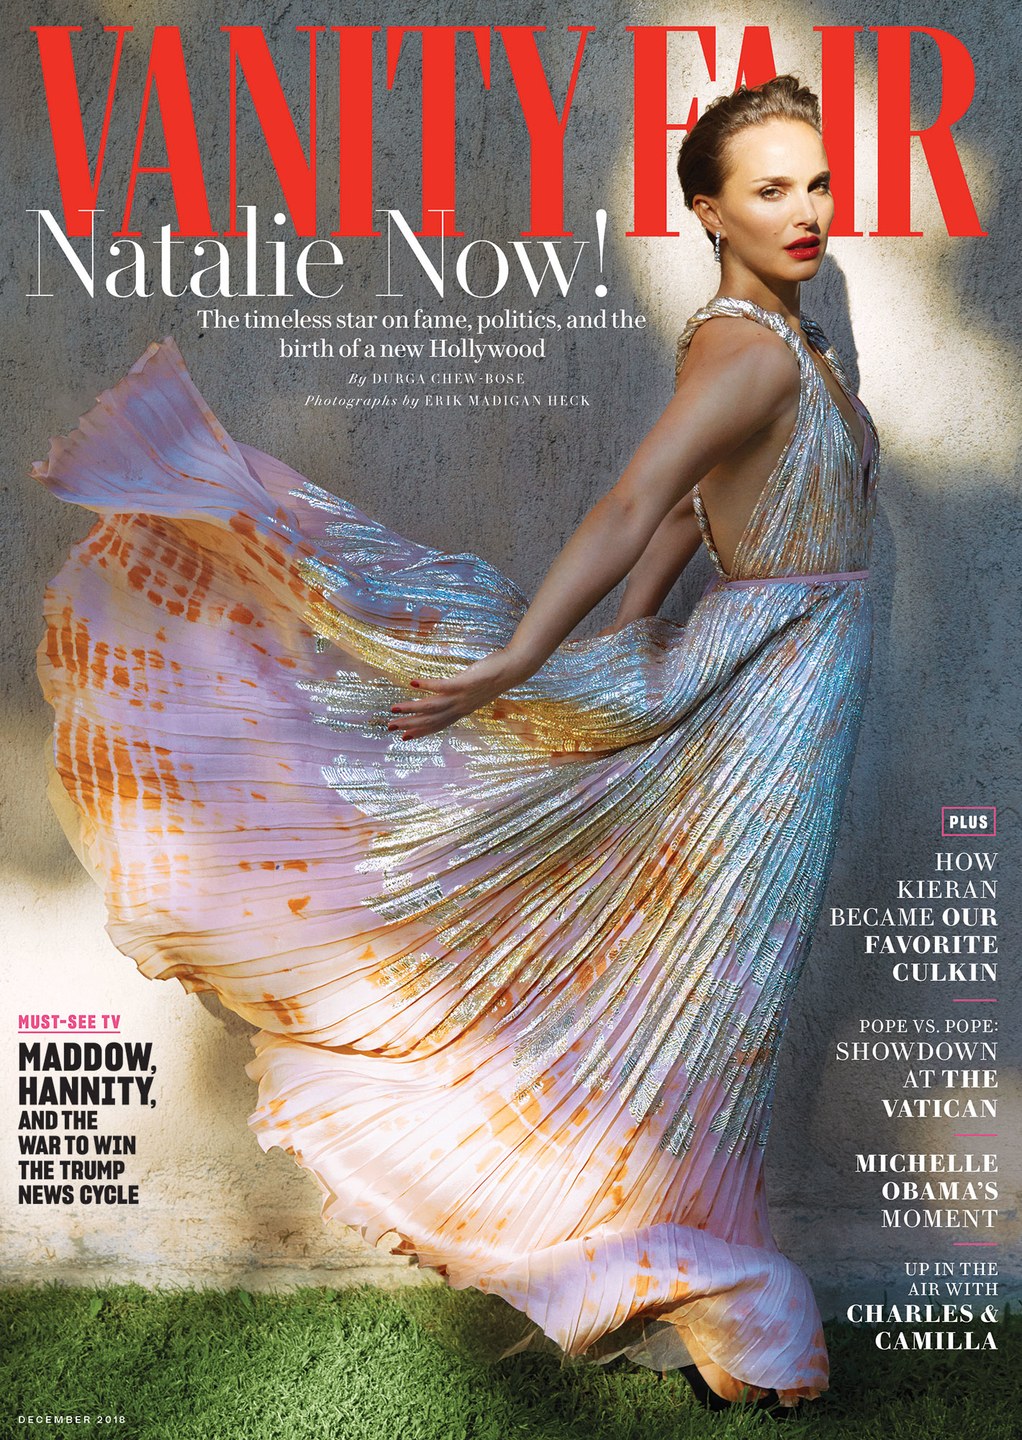 Read more about the article Natalie Portman in Vanity Fair